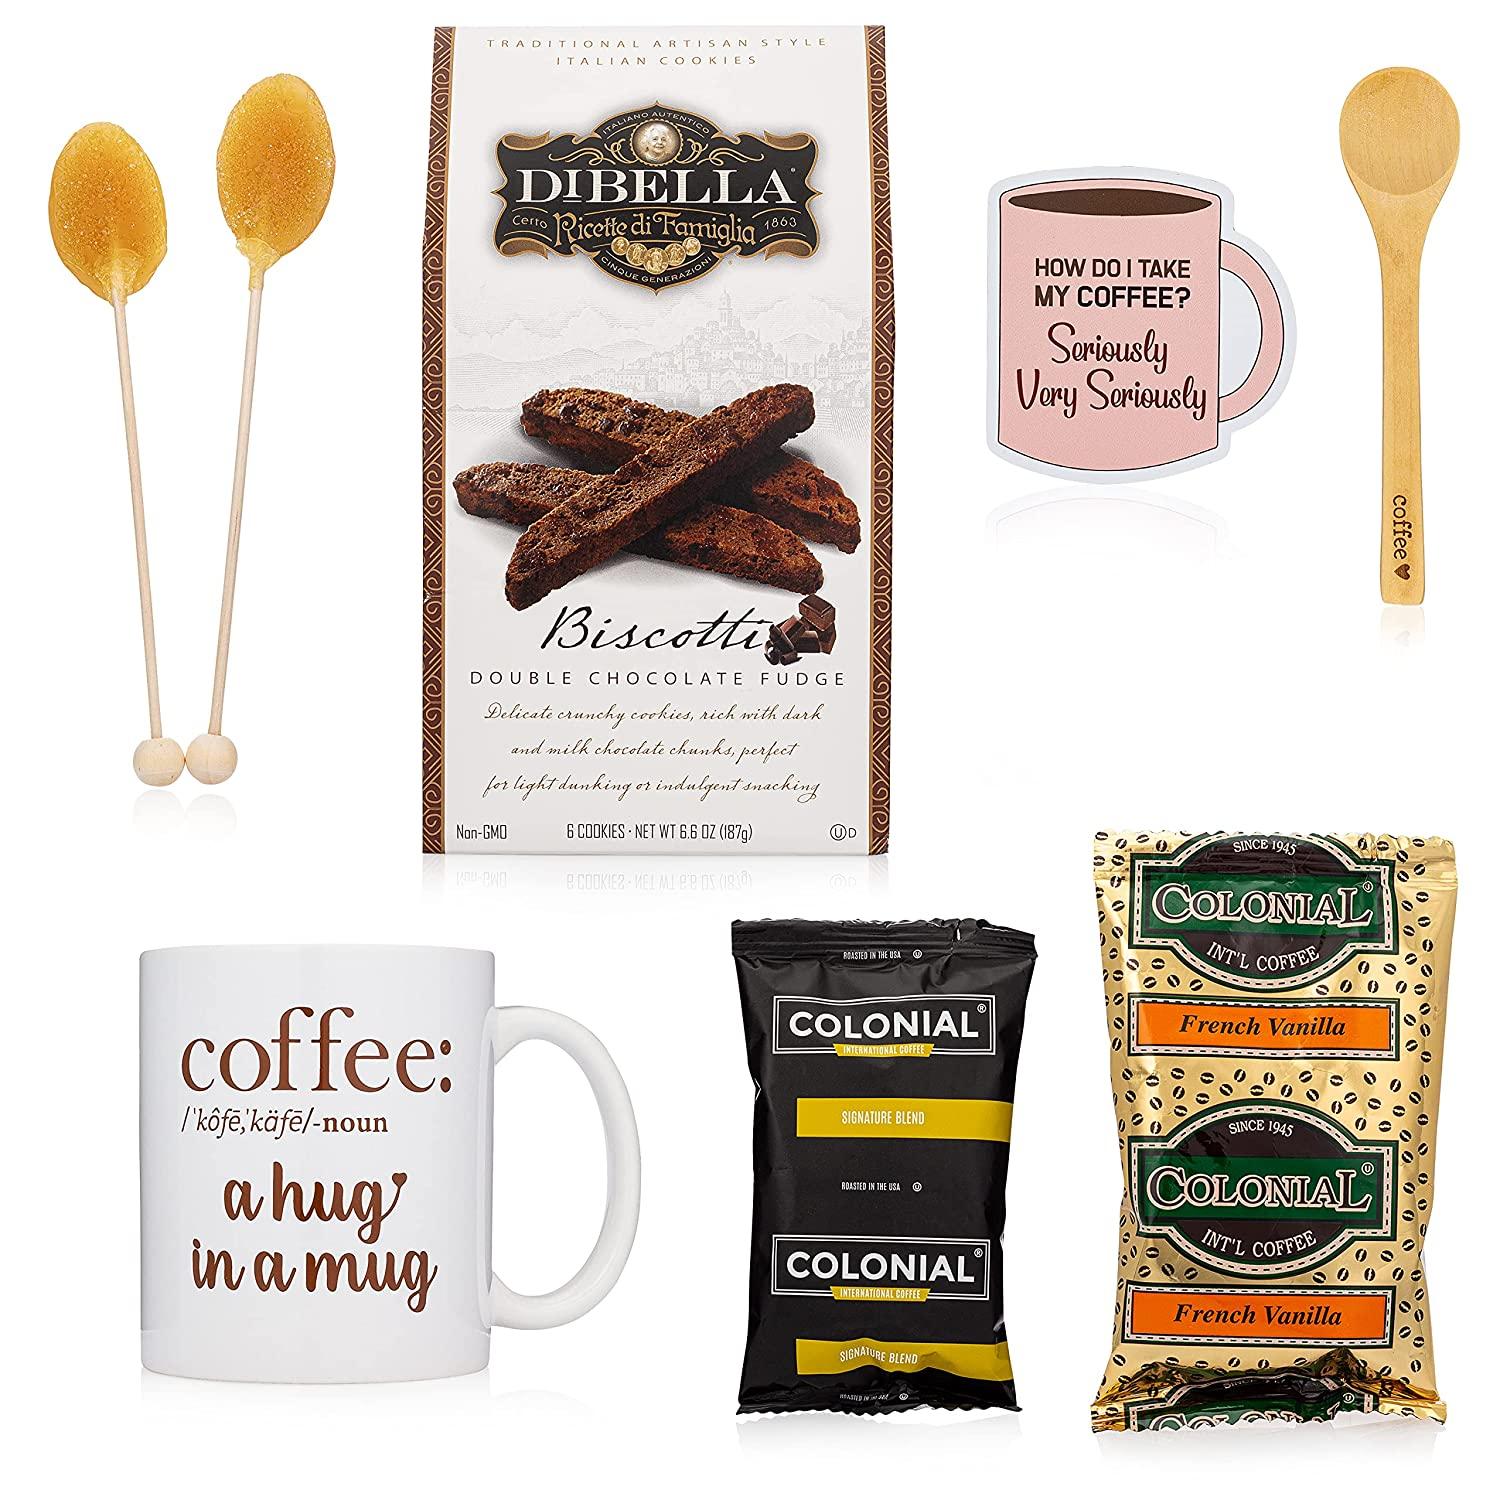 Flavorful Coffee Lovers Coffee Gift Basket - Delight them with a Coffee  Gift Set They'll Adore; Our Coffee Basket is the Finest Coffee Box; A Truly